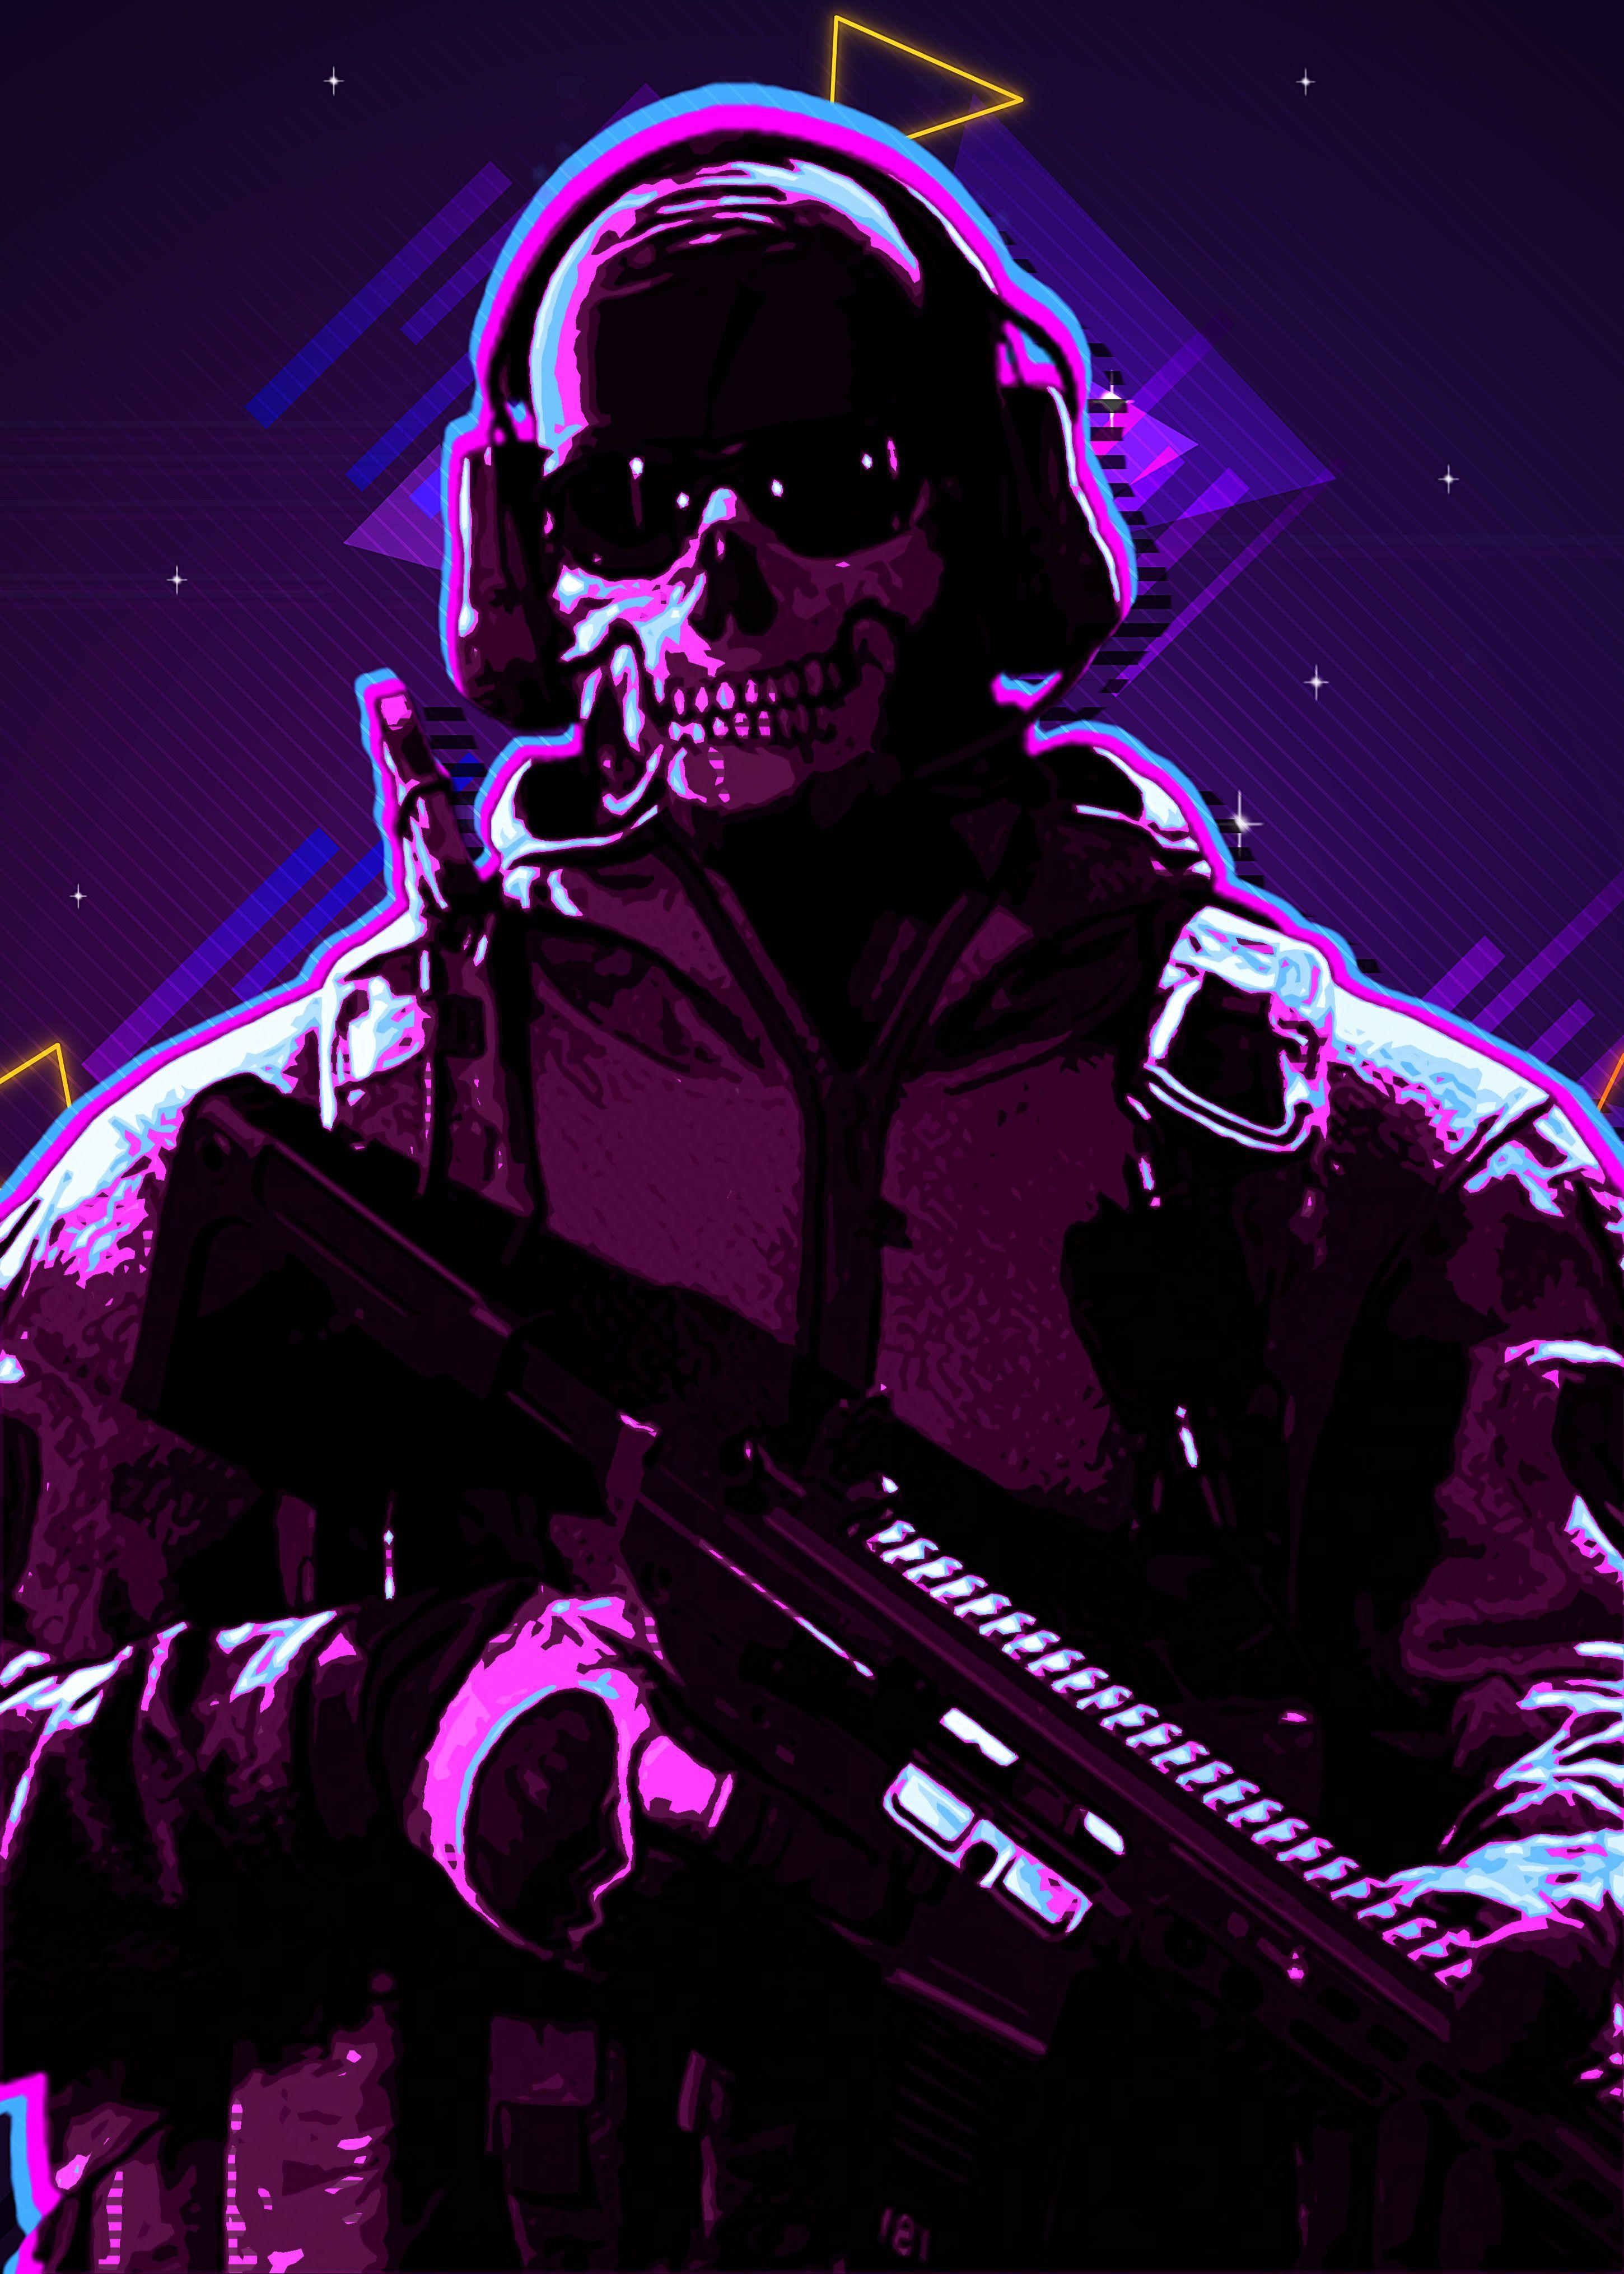 Call of Duty Ghosts Phone Wallpapers - Top Free Call of Duty Ghosts Phone  Backgrounds - WallpaperAccess